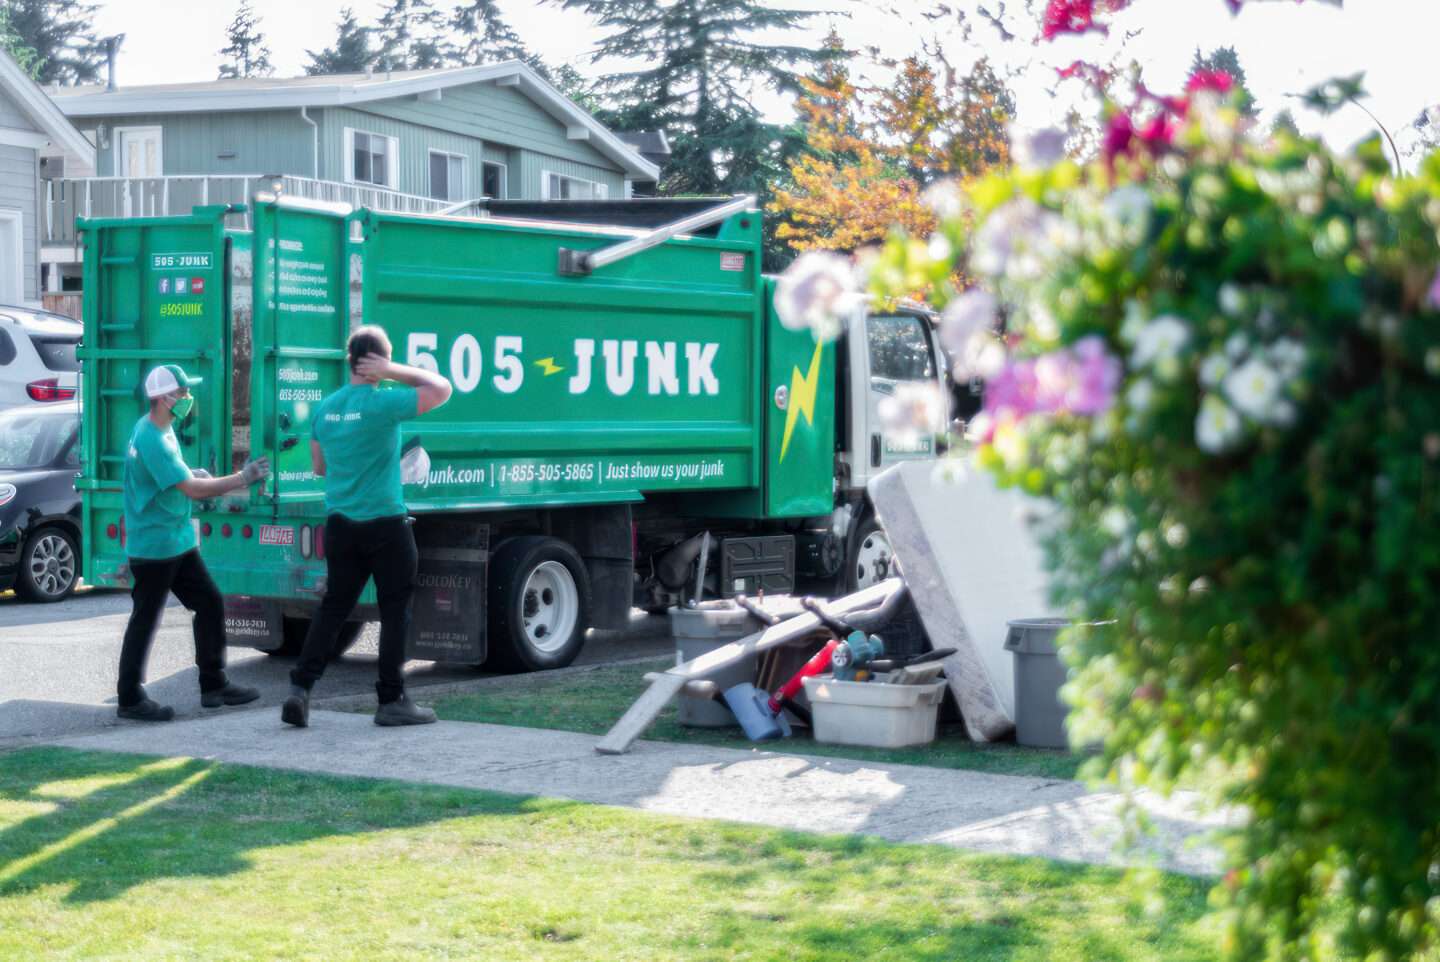 Spring Cleaning Tips from 505-Junk. Junk truck parked with 2 young people loading and spring flowers in the foreground. 